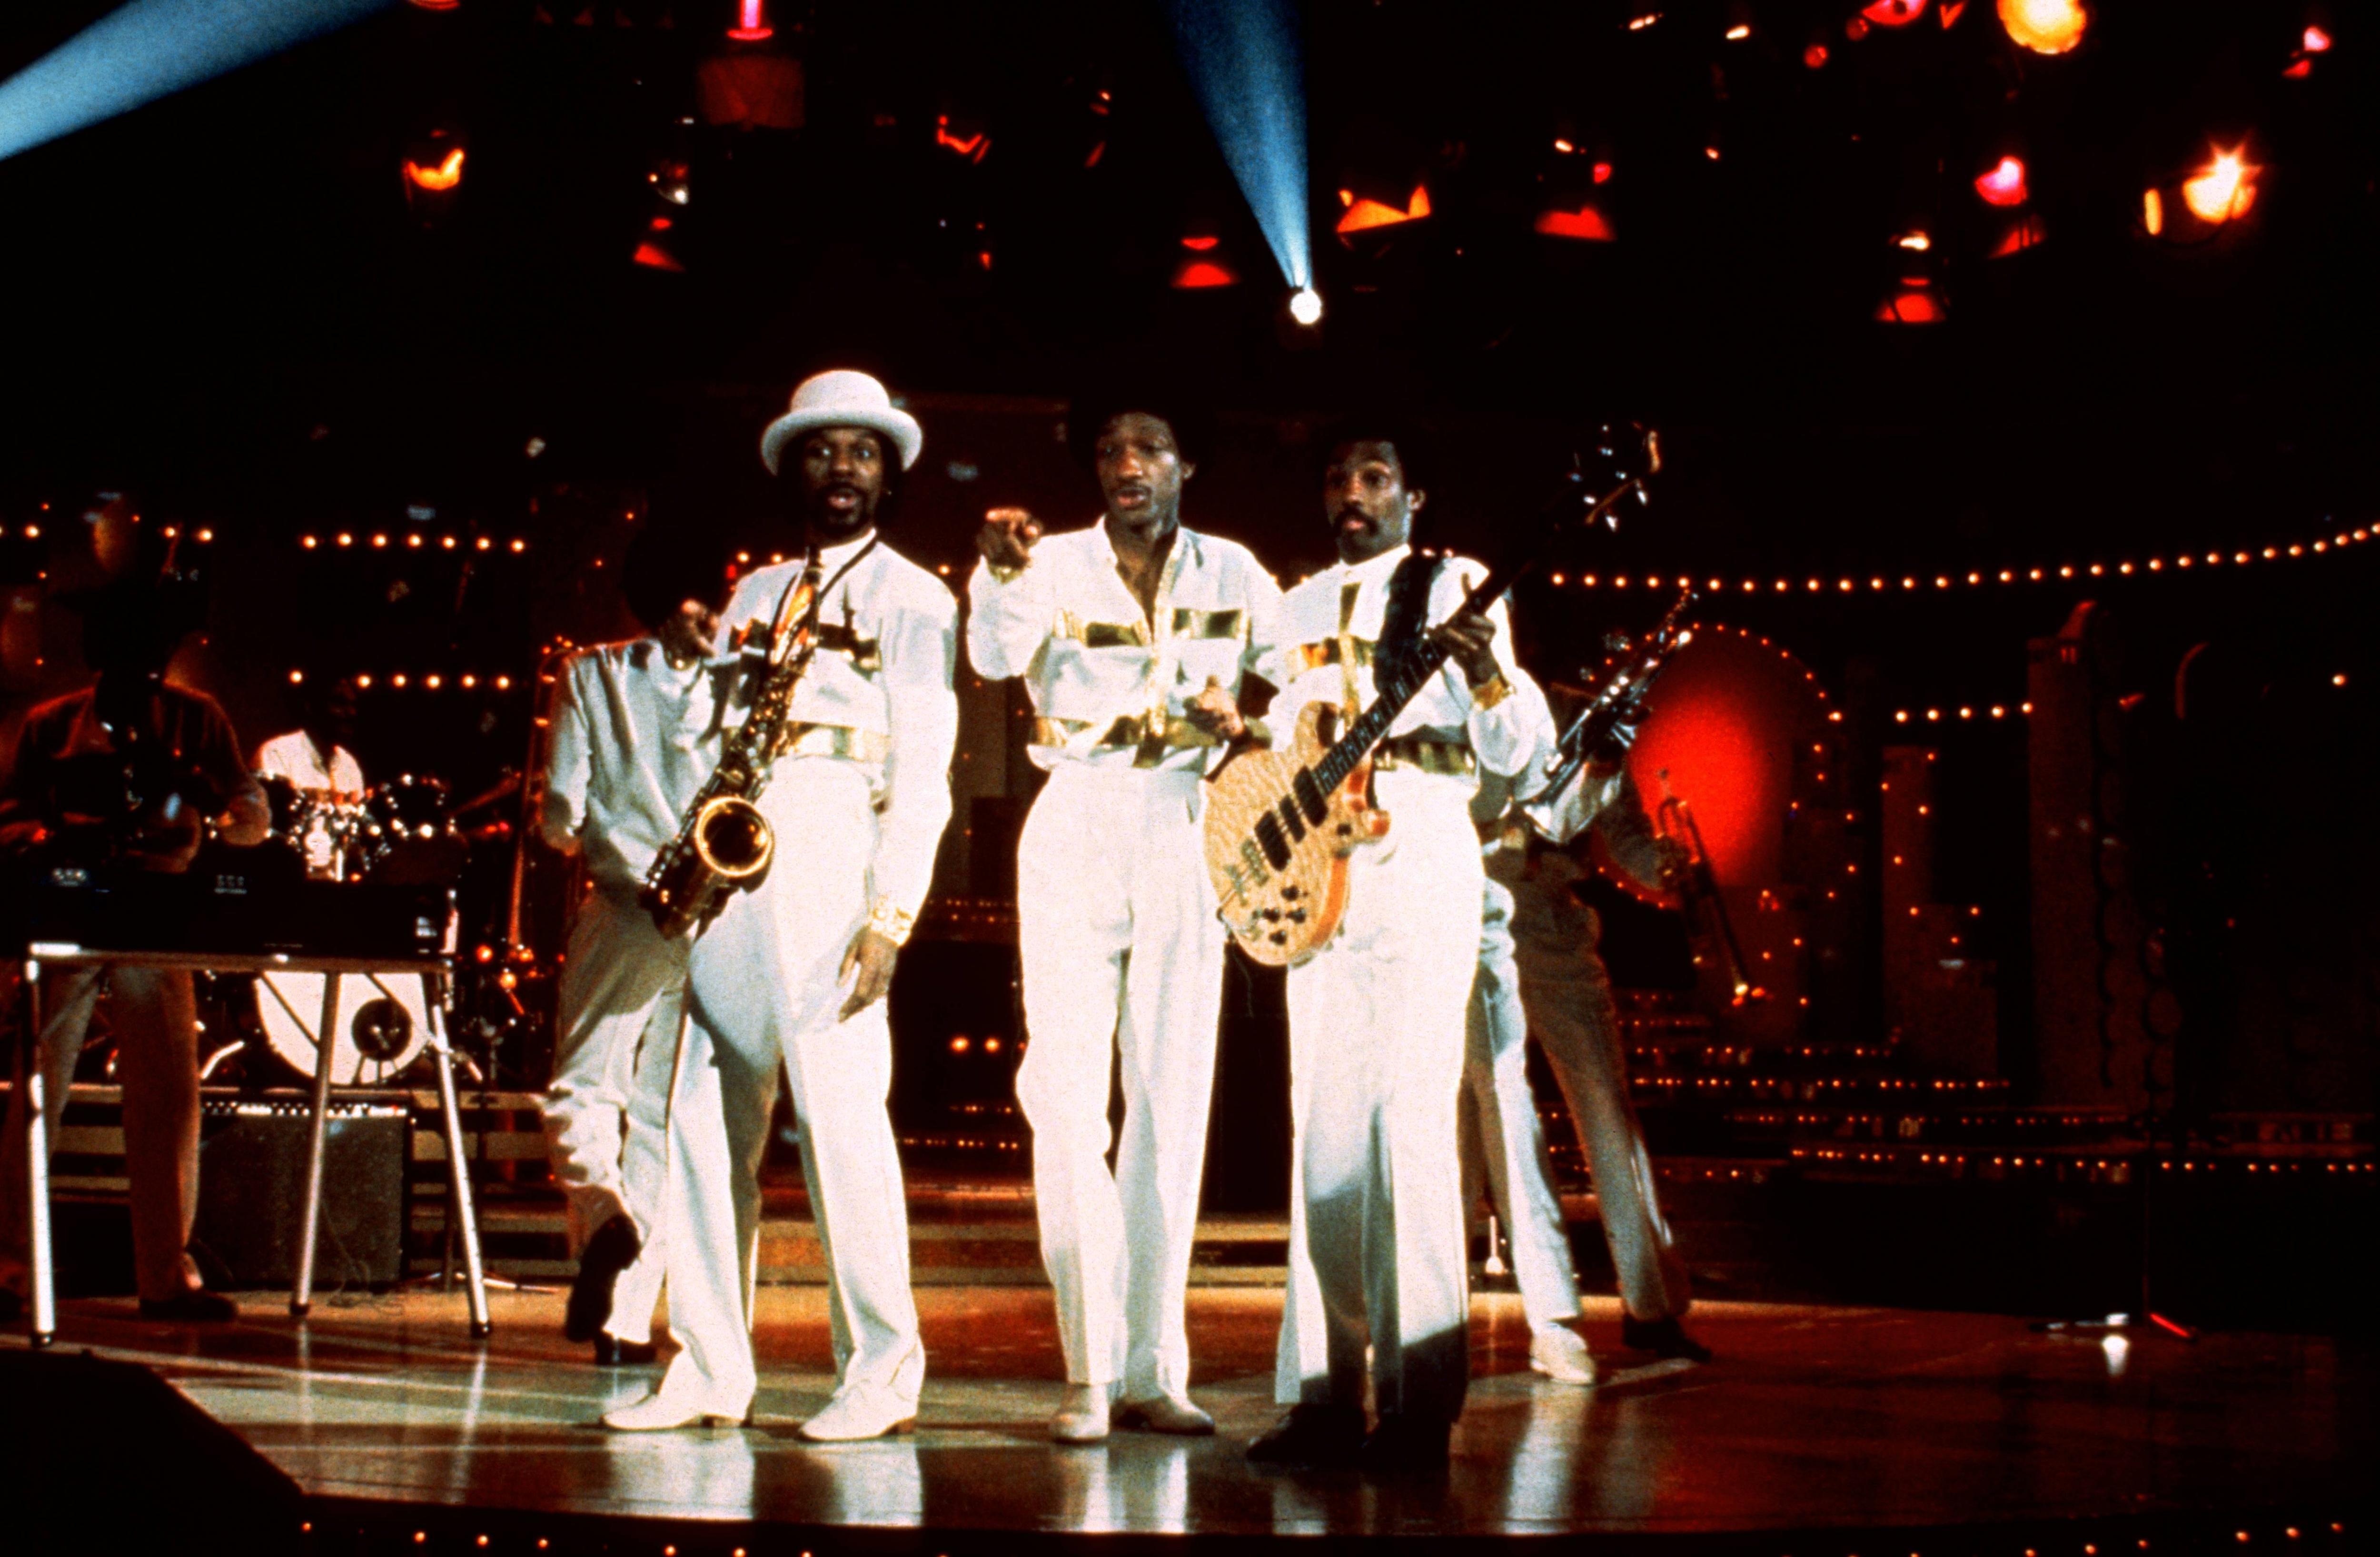 Kool & The Gang perform live in 1970 in matching all-white outfits